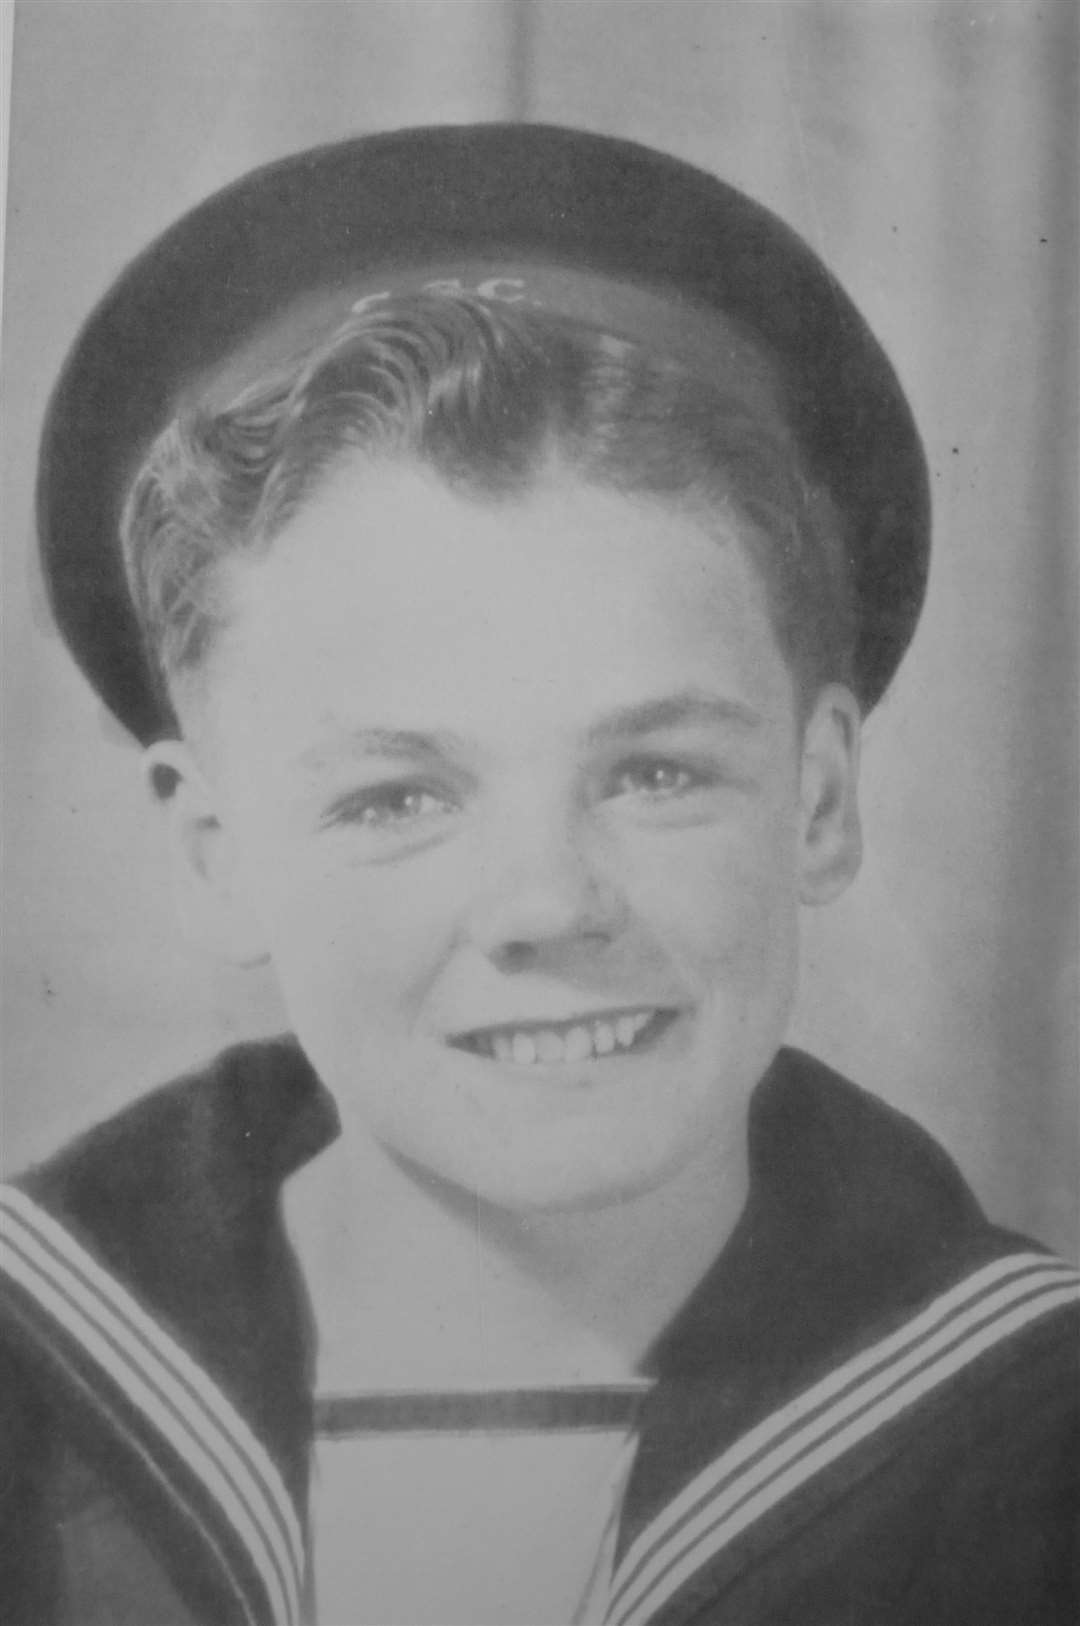 Denis Llewellyn as a young man